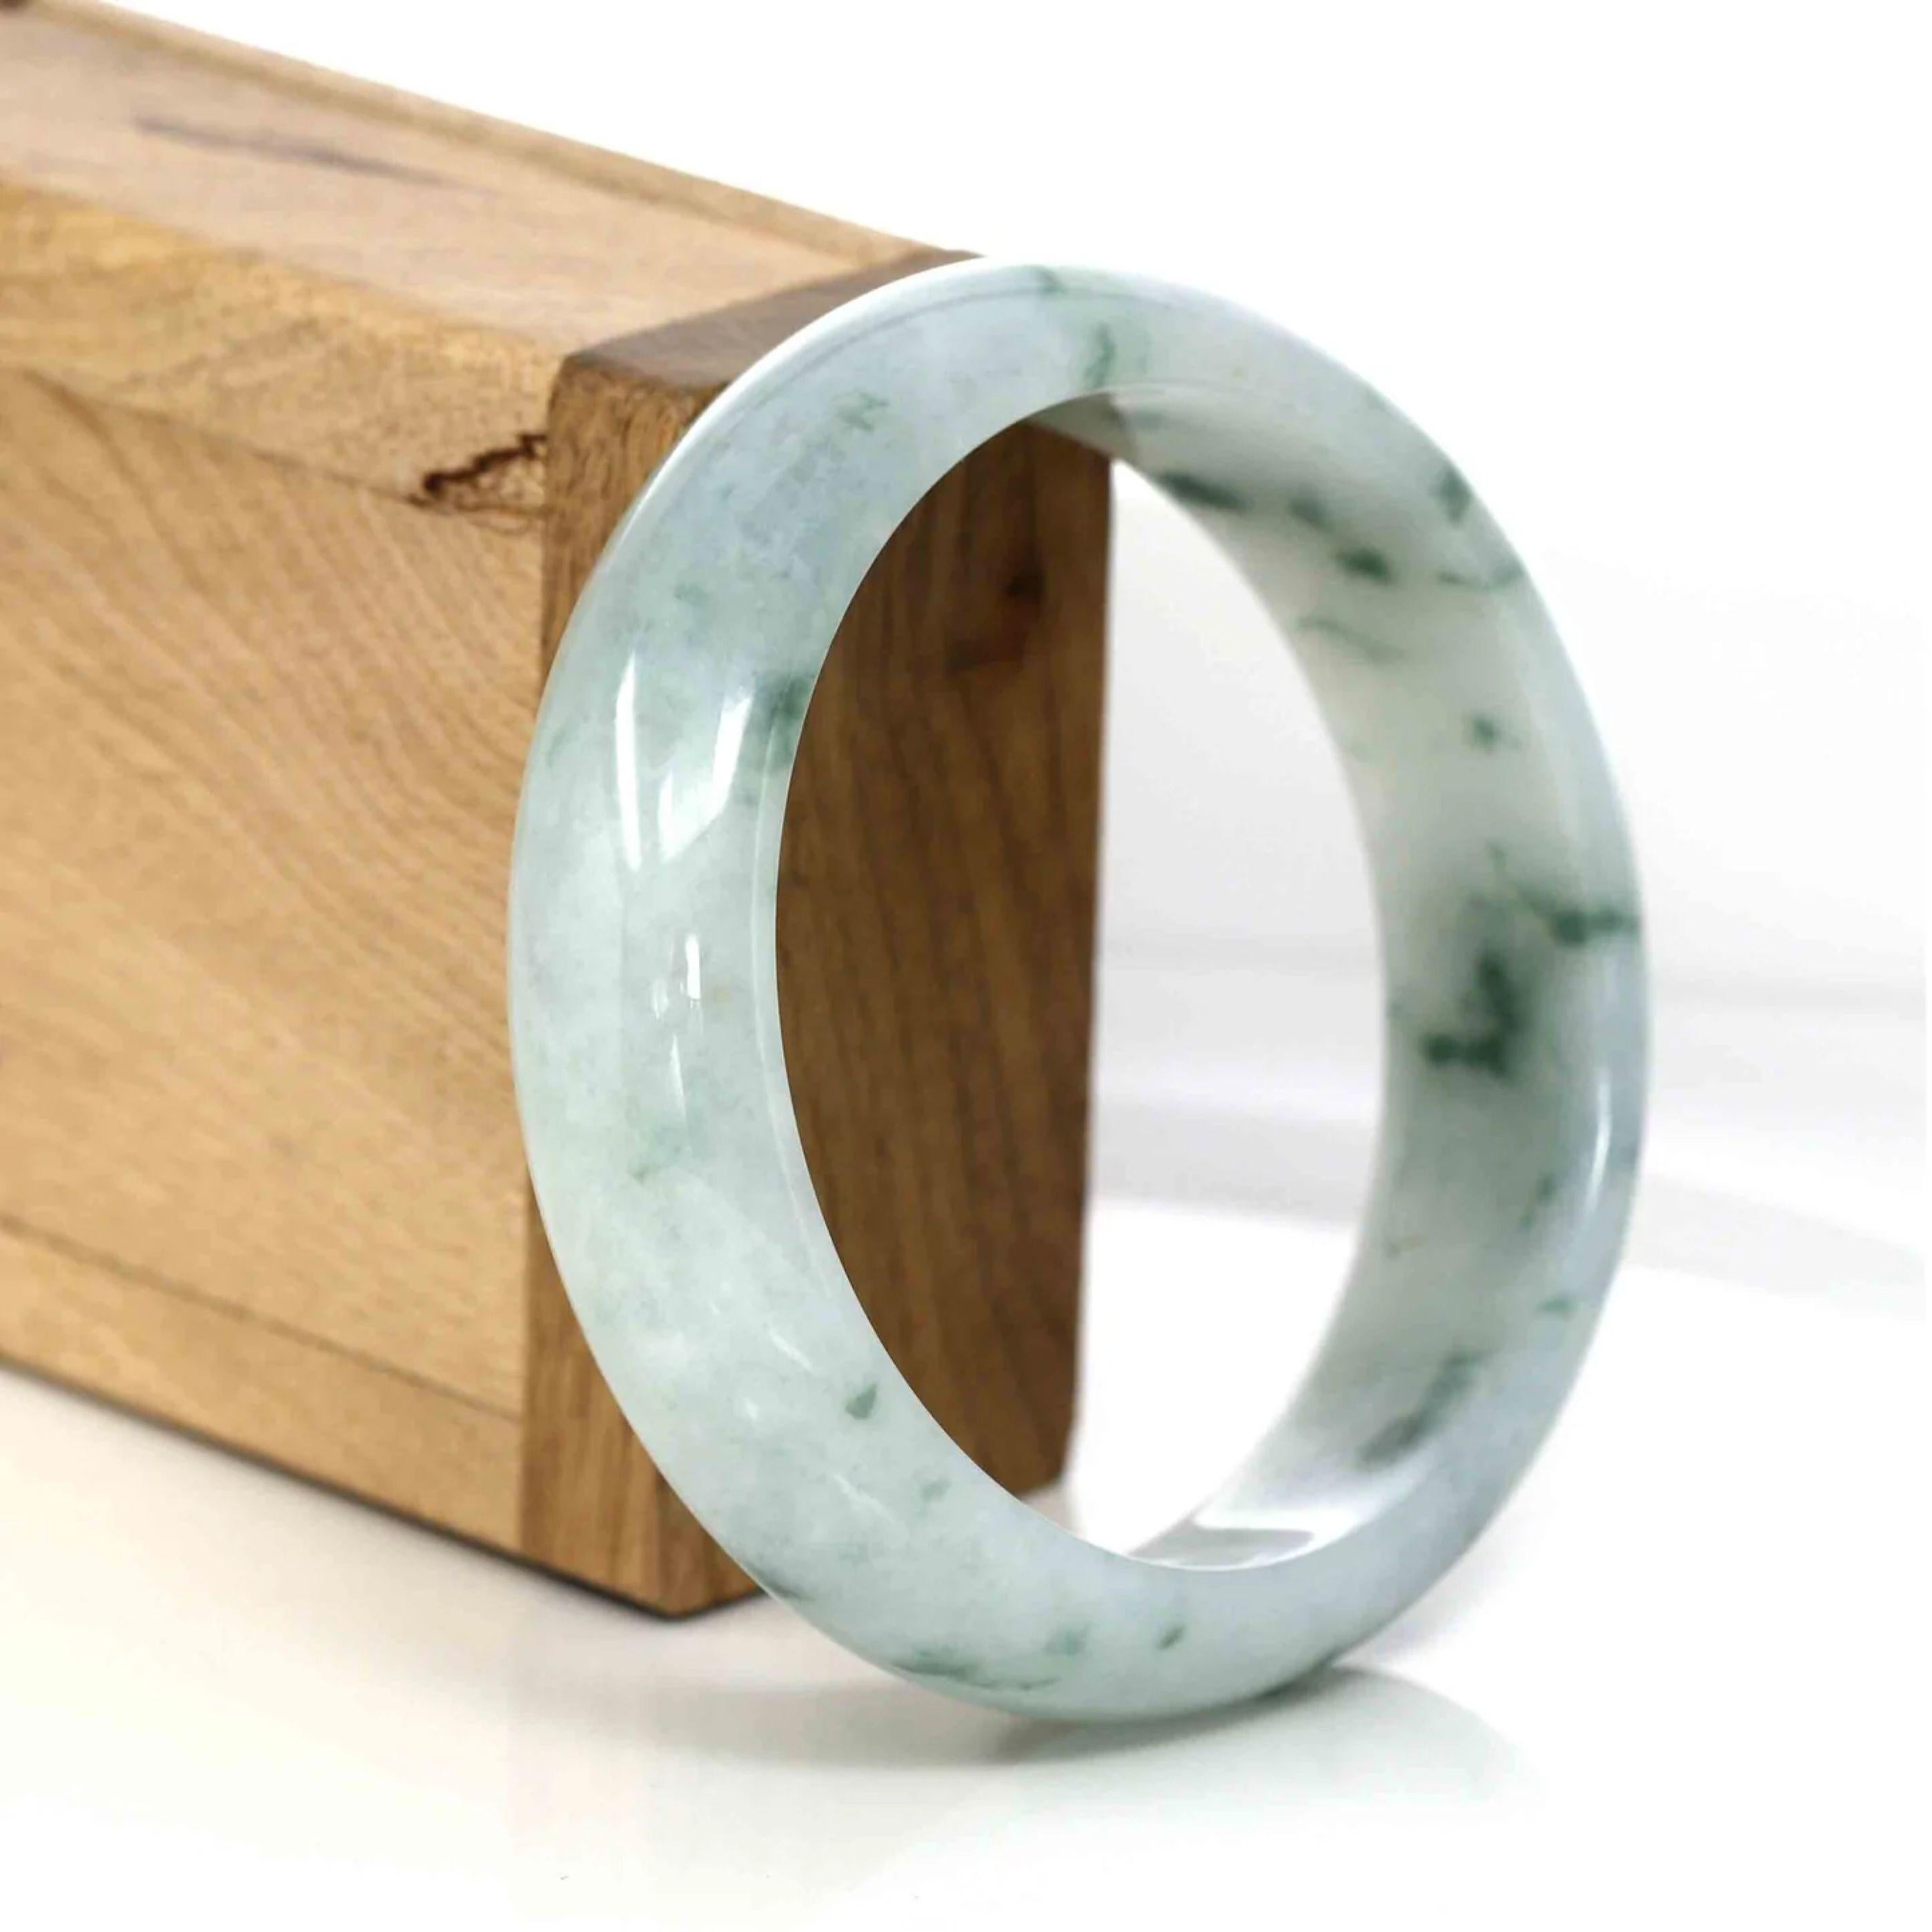 RealJade Classic Real Jade Jadeite Bangle Bracelet (60.31 mm)#308 In New Condition For Sale In Portland, OR